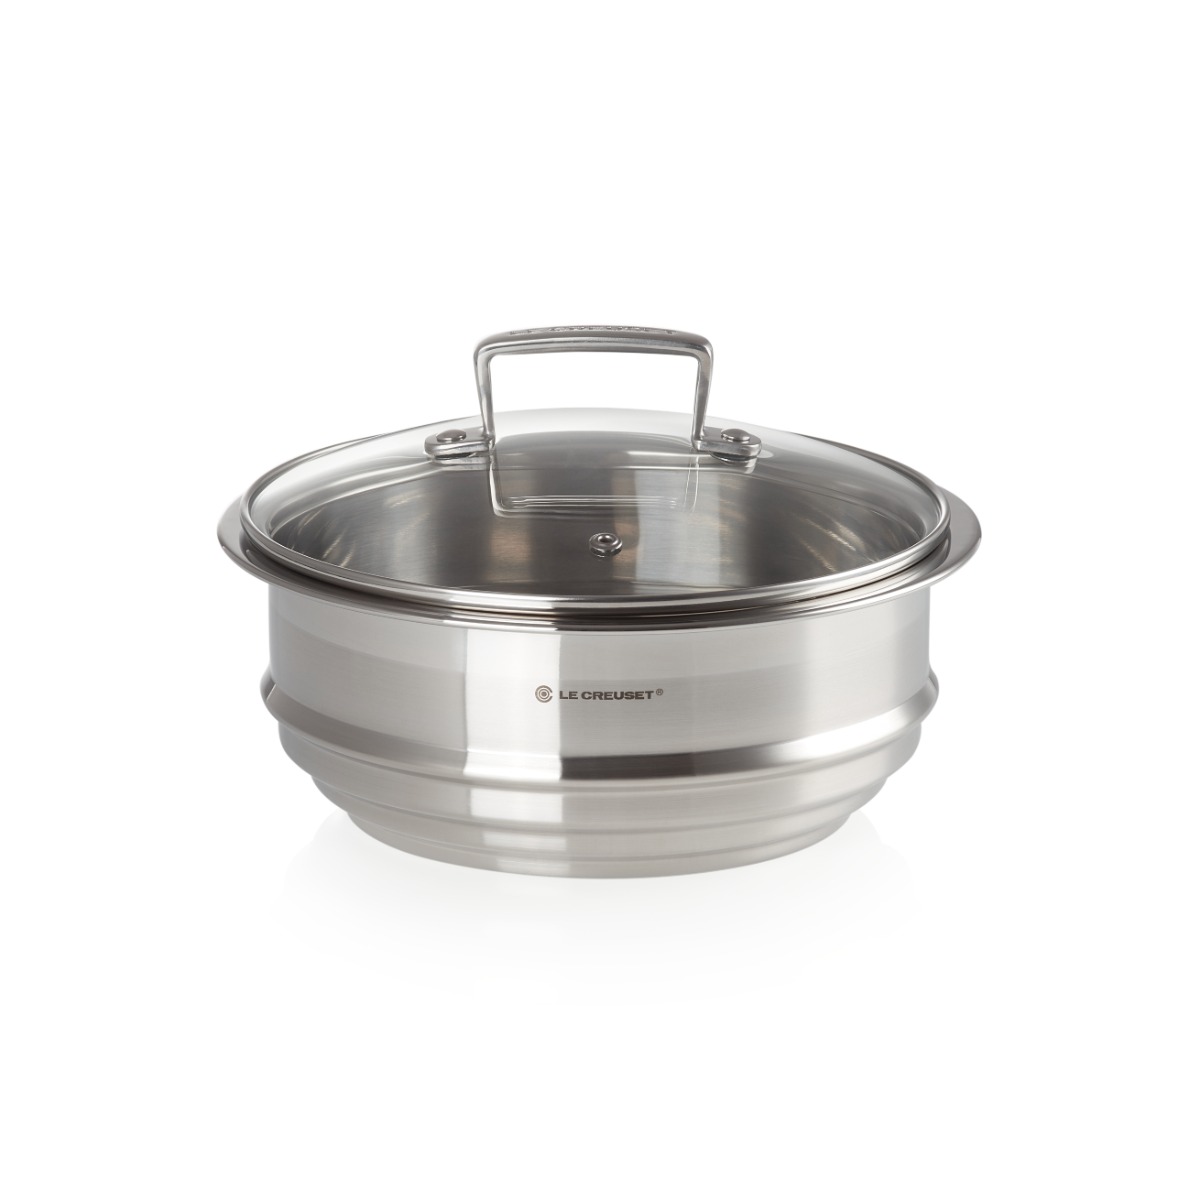 Le Creuset 962019001 3Ply Multi Steamer with Glass Lid - Stainless Steel